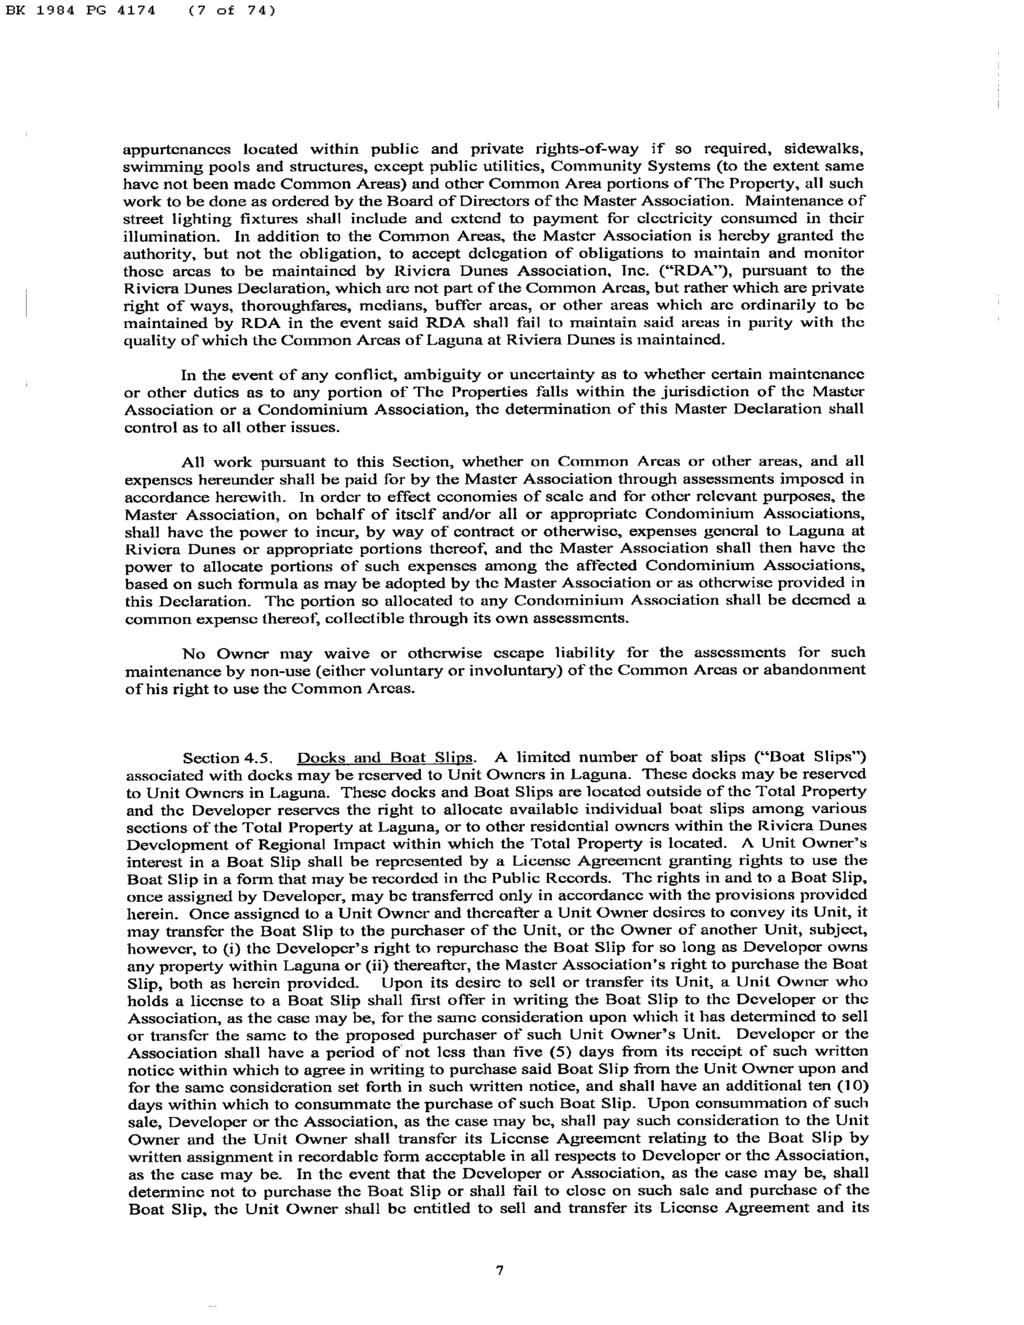 BK 1904 PG 4174 (7 of 74) appurtenances located within public and private rights-of-way if so required, sidewalks, swimming pools and structures, except public utilities, Community Systems (to the